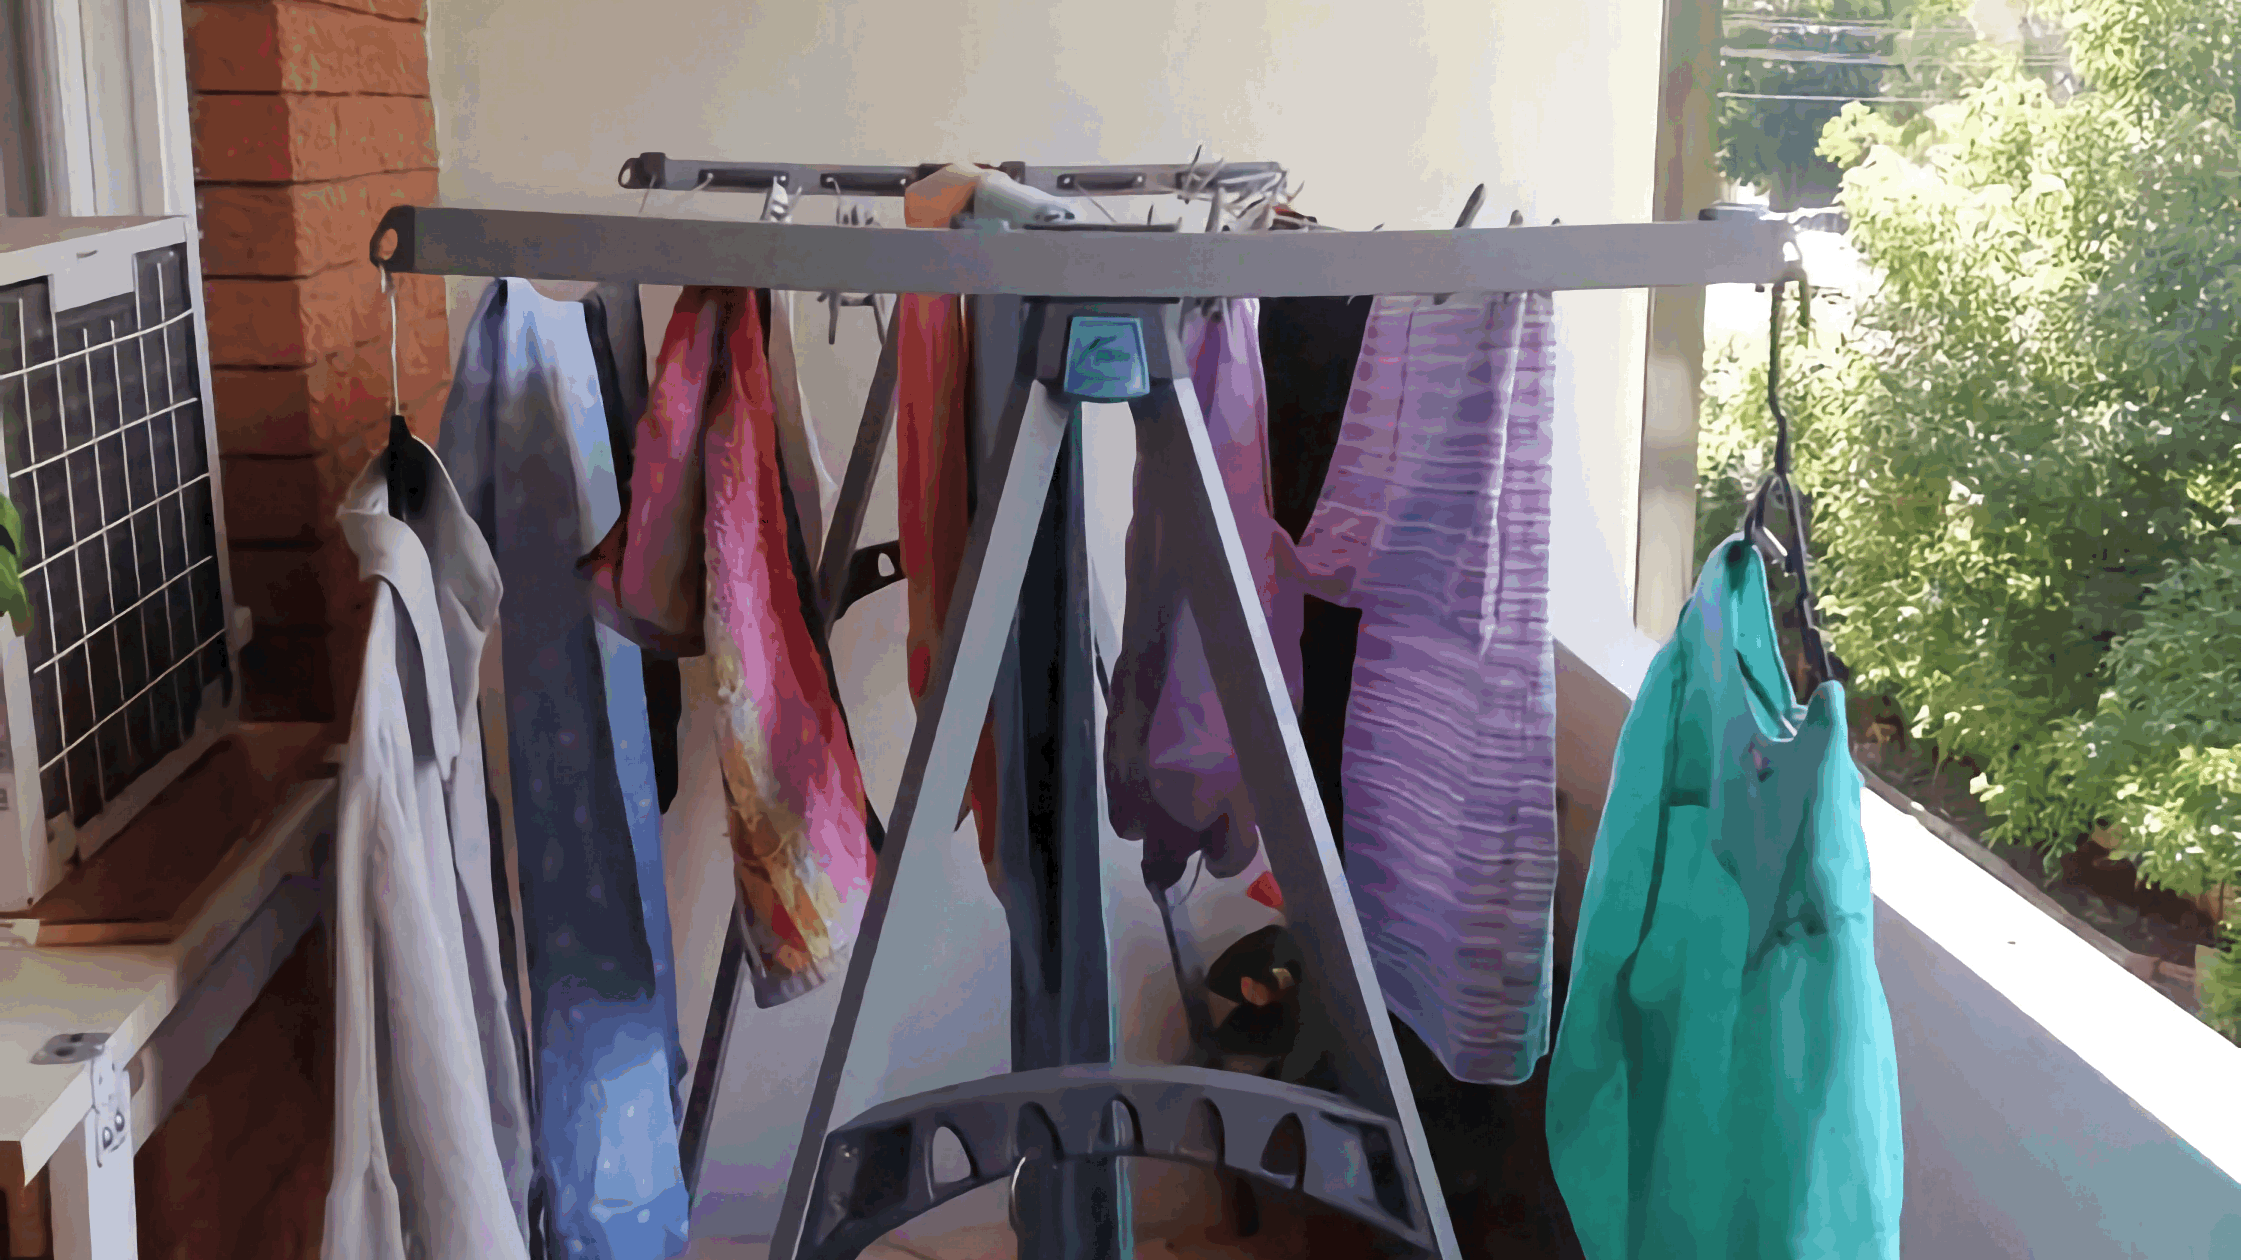 Portable Clotheslines or Indoor Clothes Drying Racks in a strata or apartment